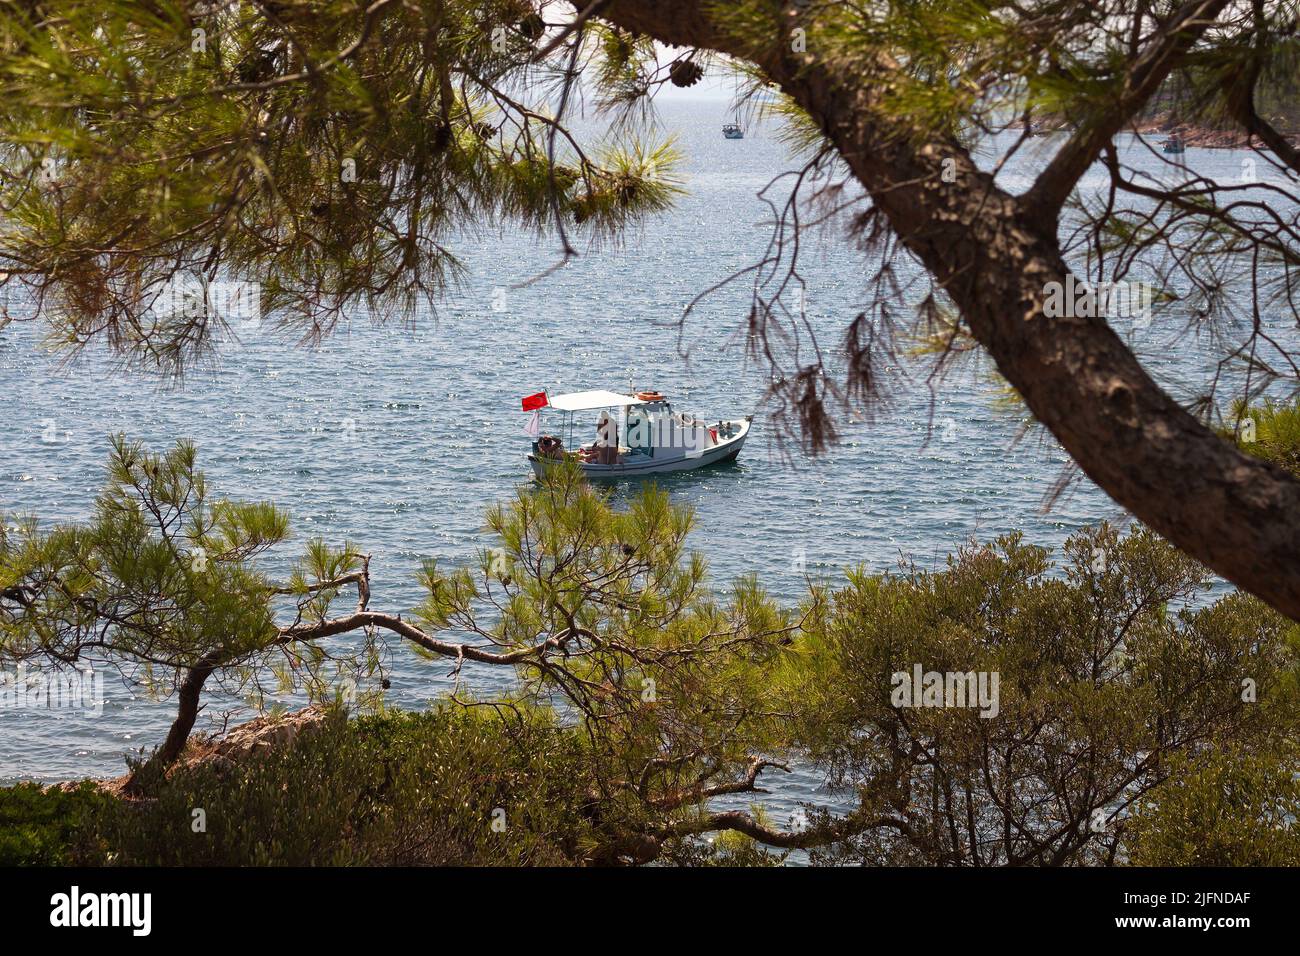 View of a wooden, traditional fishing boat through pine tress called Pinus Brutia and Aegean sea captured in Ayvalik area of Turkey. It is a sunny sum Stock Photo